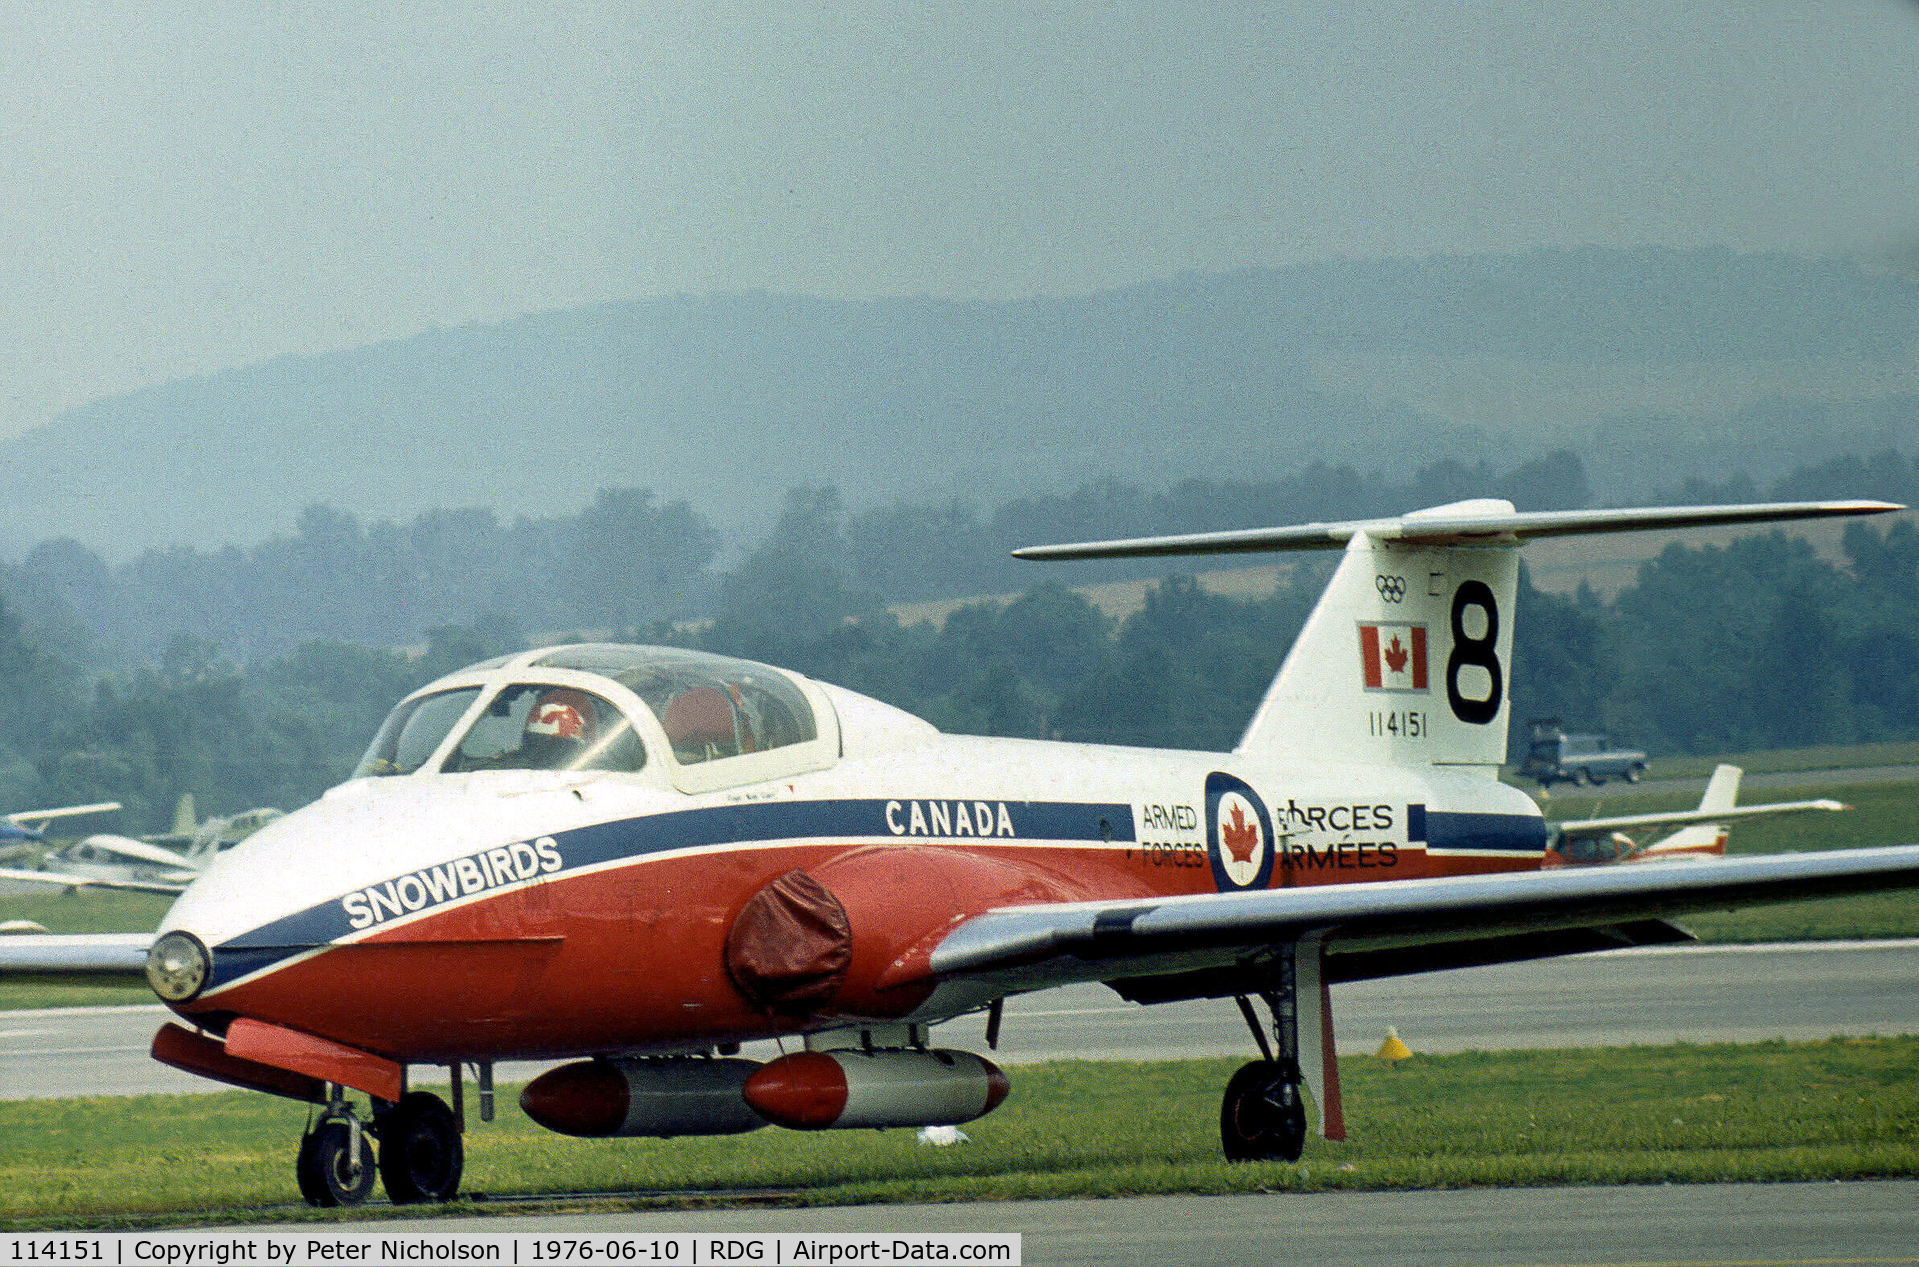 114151, 1971 Canadair CT-114 Tutor C/N 1151, CT-114 Tutor of the Canadian Armed Forces Snowbirds aerobatic display team on the flight-line at the 1976 Reading Airshow.